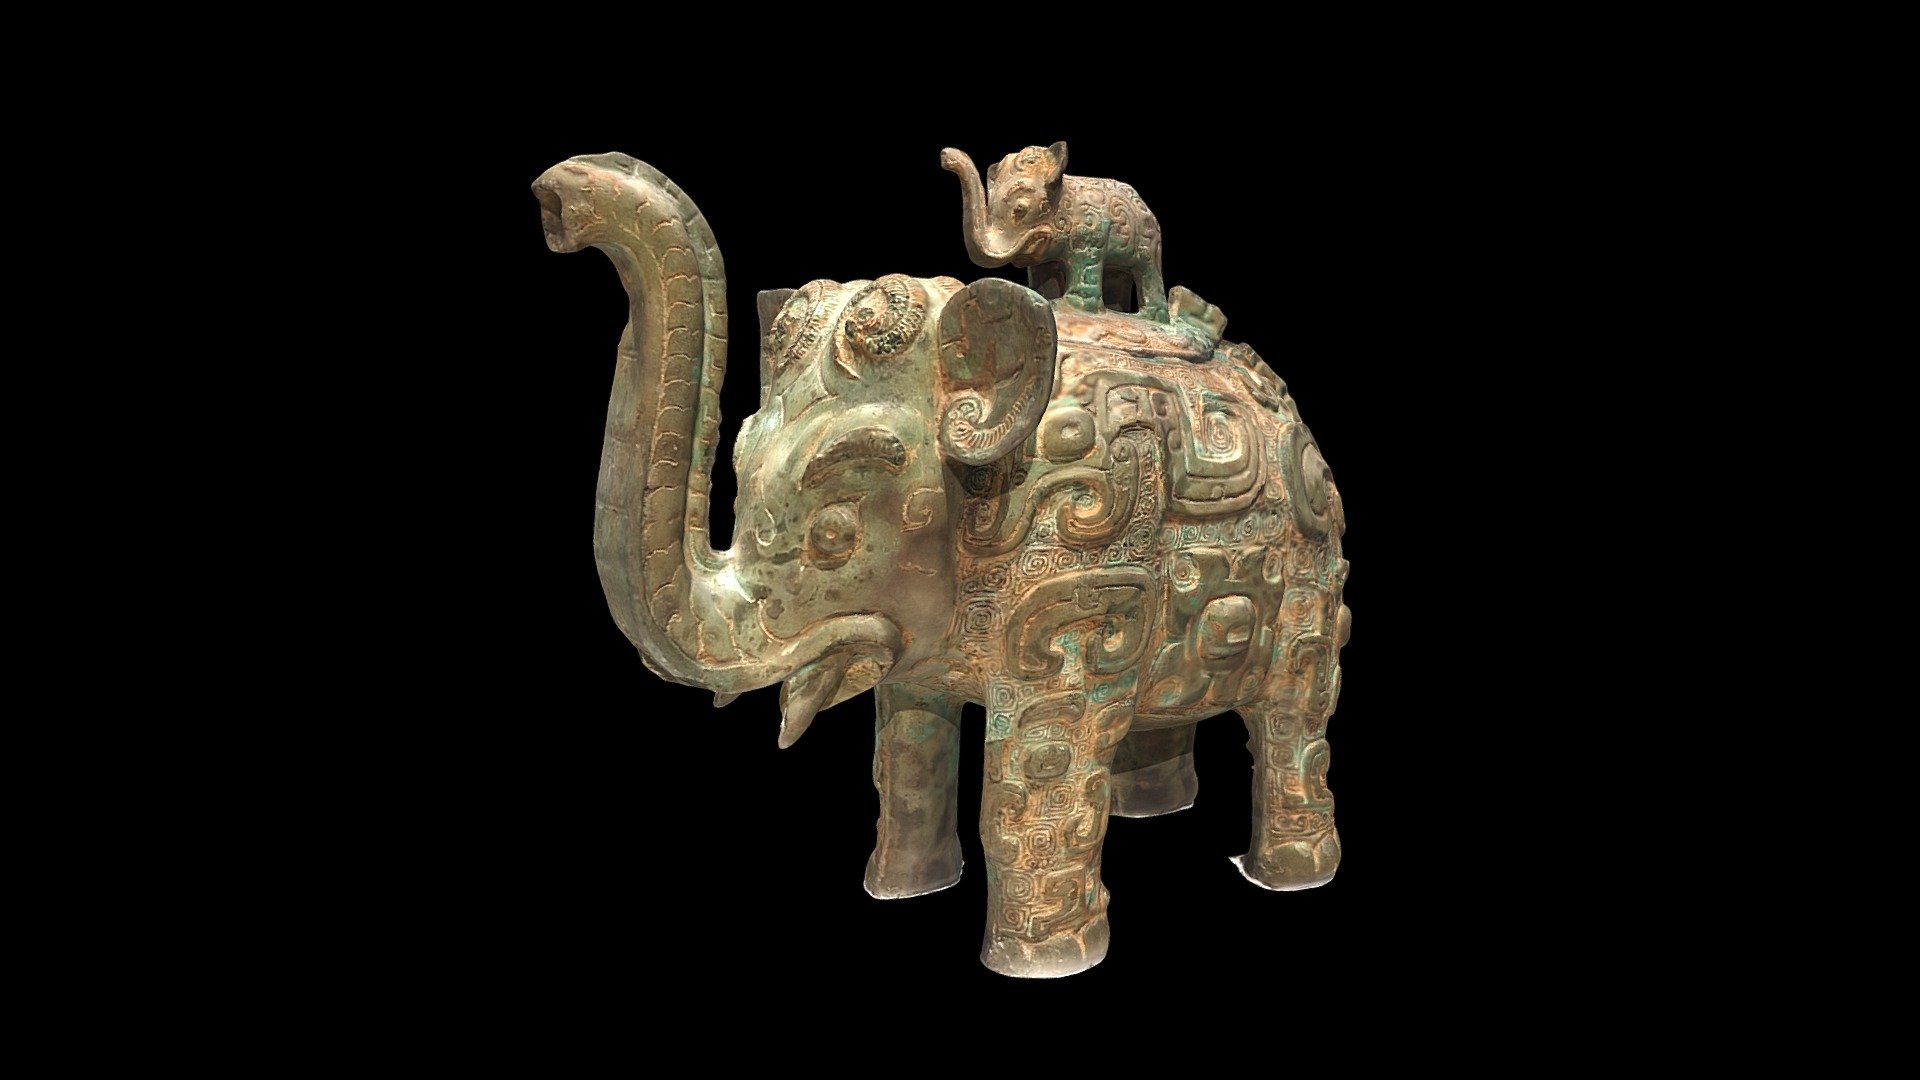 Chinese bronze He vessel in the shape of an elephant. Late Anyang Period (ca. 1100 B.C.), China. National Museum of Art, Smithsonian (F1936.6A-B), Washington, D.C.

Created from 262 photographs (Motorolla Moto G Stylus 2020 mobile phone) using Metashape 1.8.4.  Photographed in October 2023 3d model